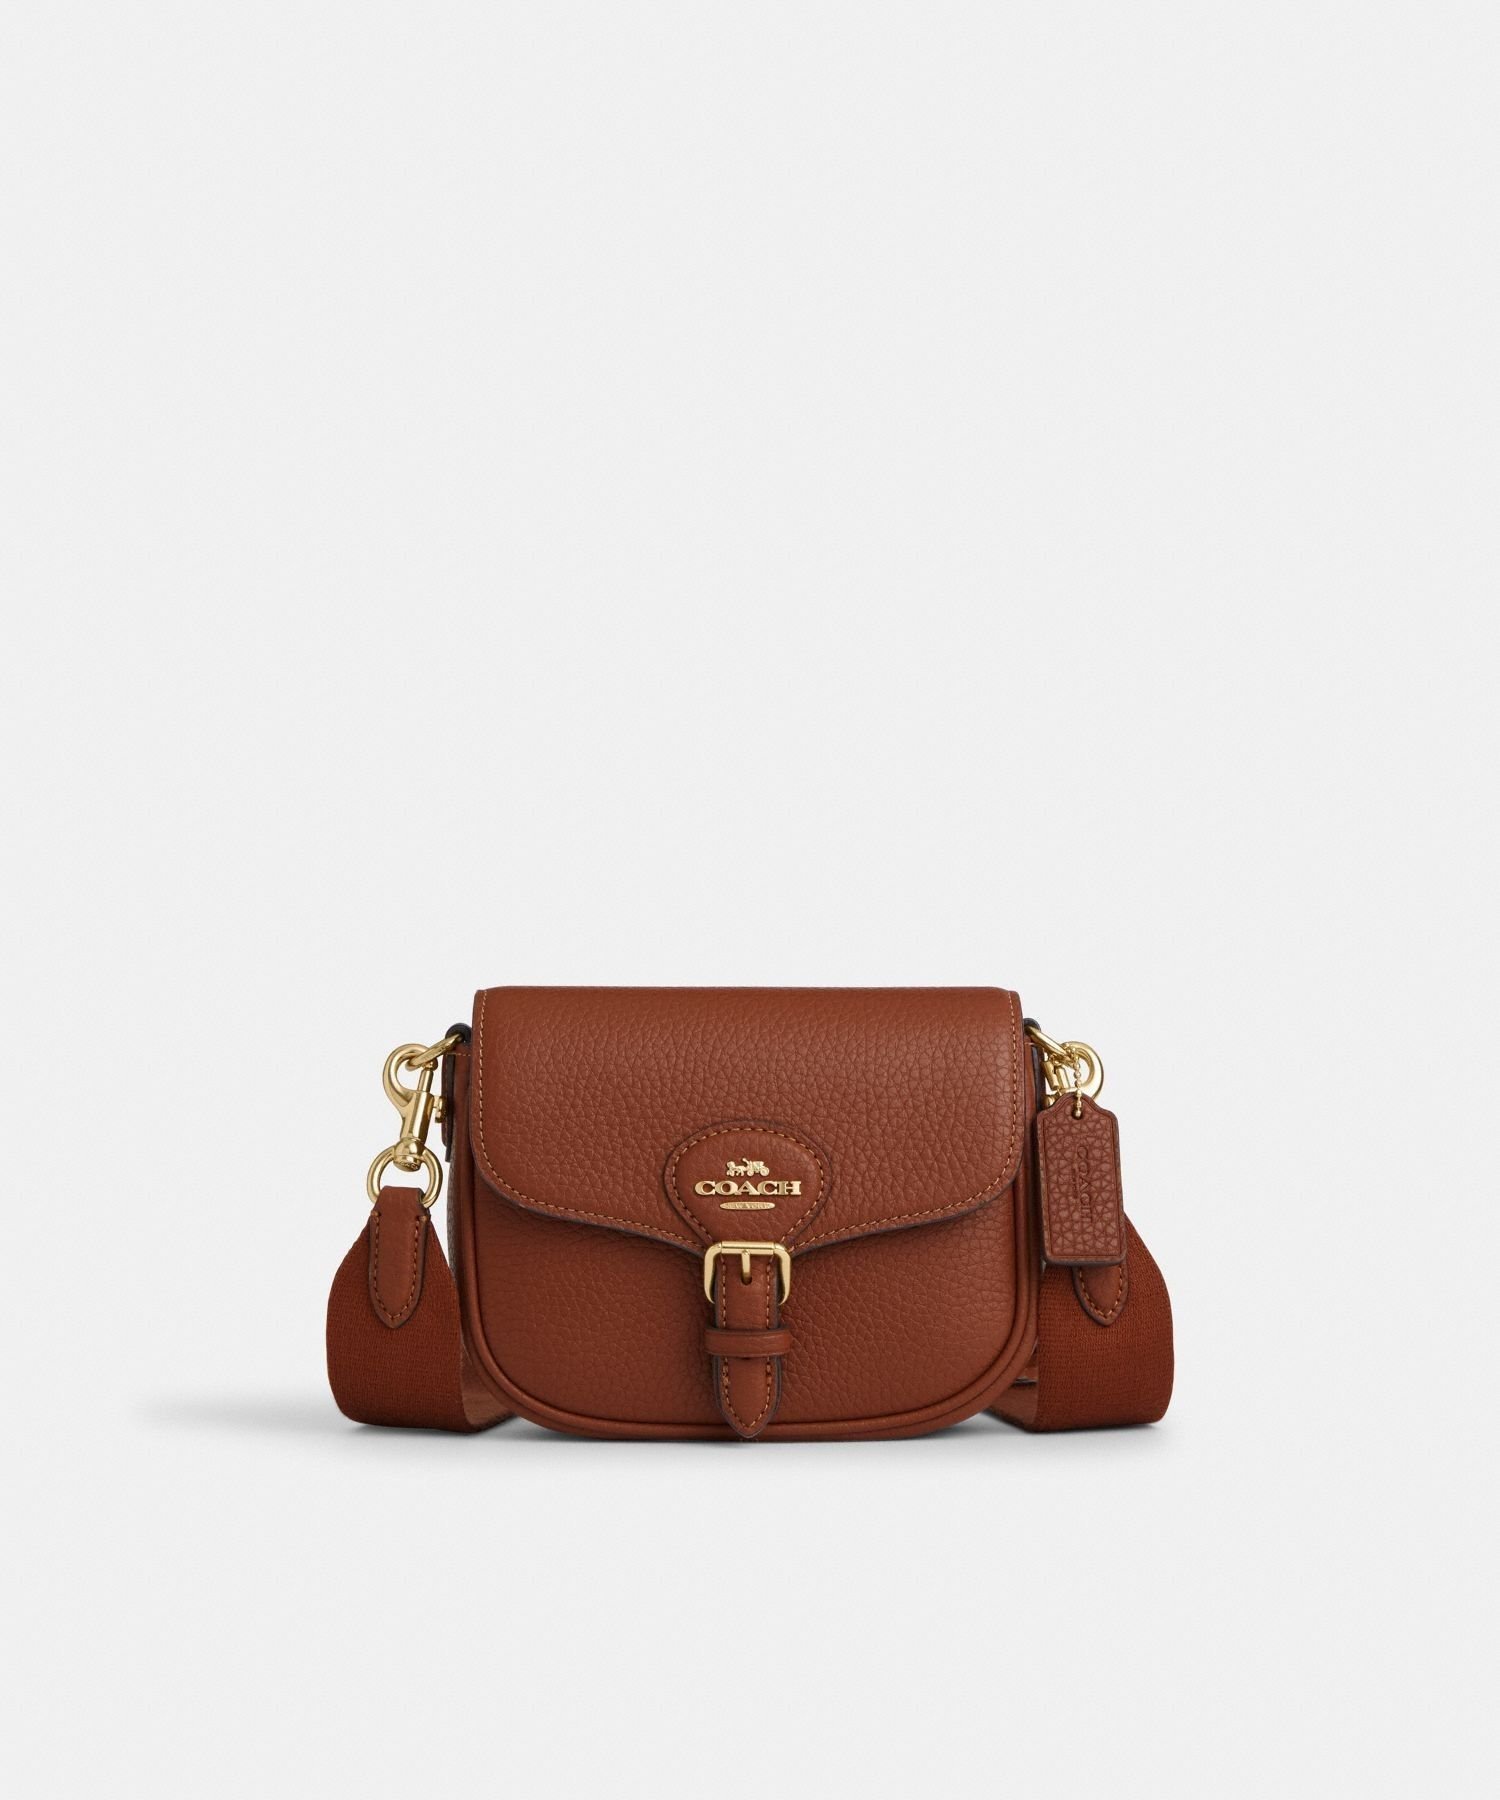 【SALE／62%OFF】COACH OUTLET アメリア スモール サドル バッグ コーチ　アウトレット バッグ ショルダーバッグ ブラウン【送料無料】